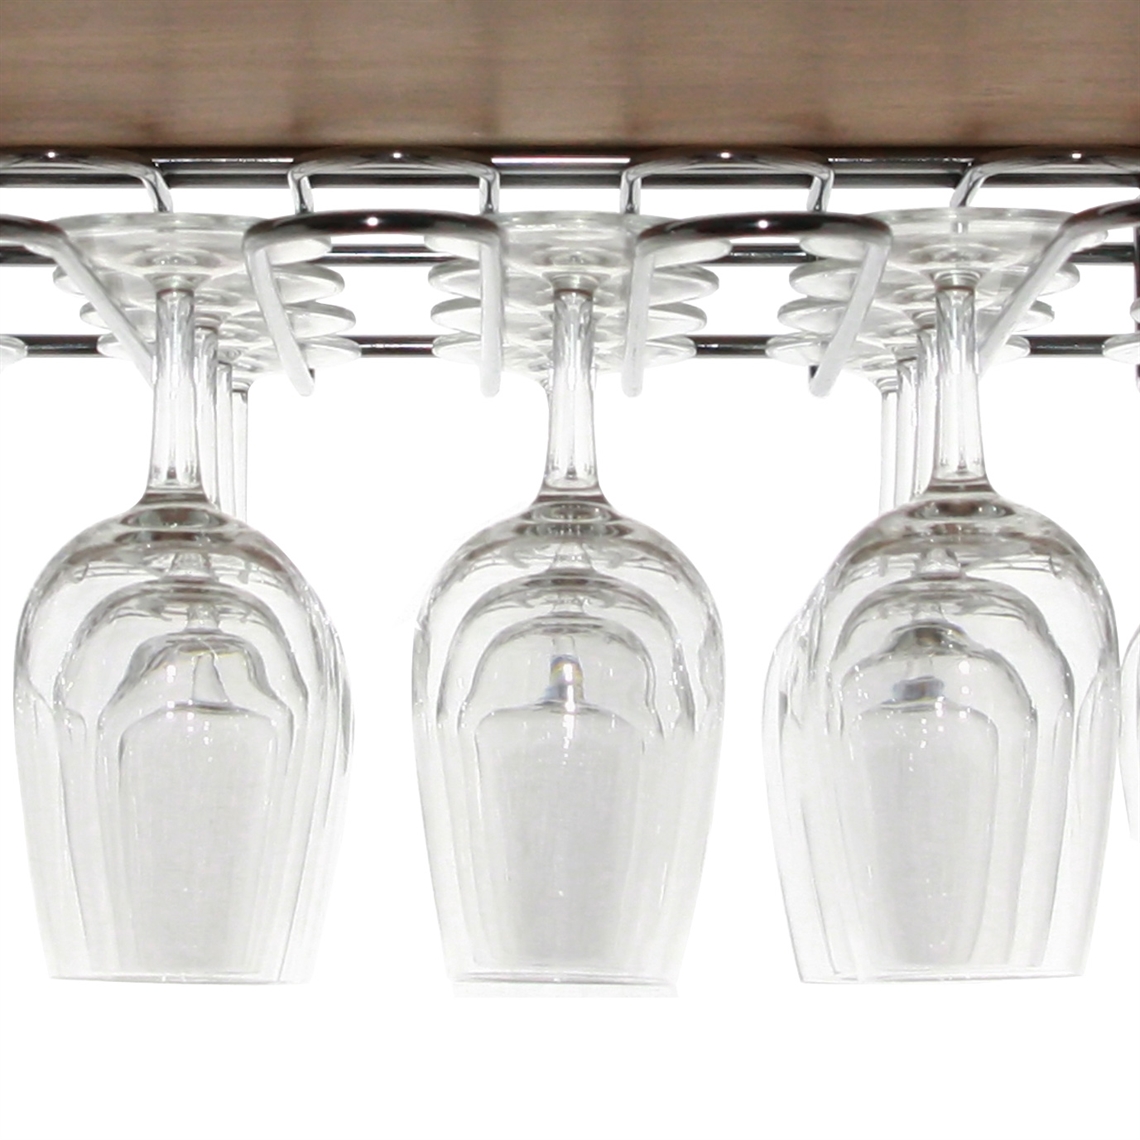 View more elia crystal from our Wine Glass Hanging Racks range